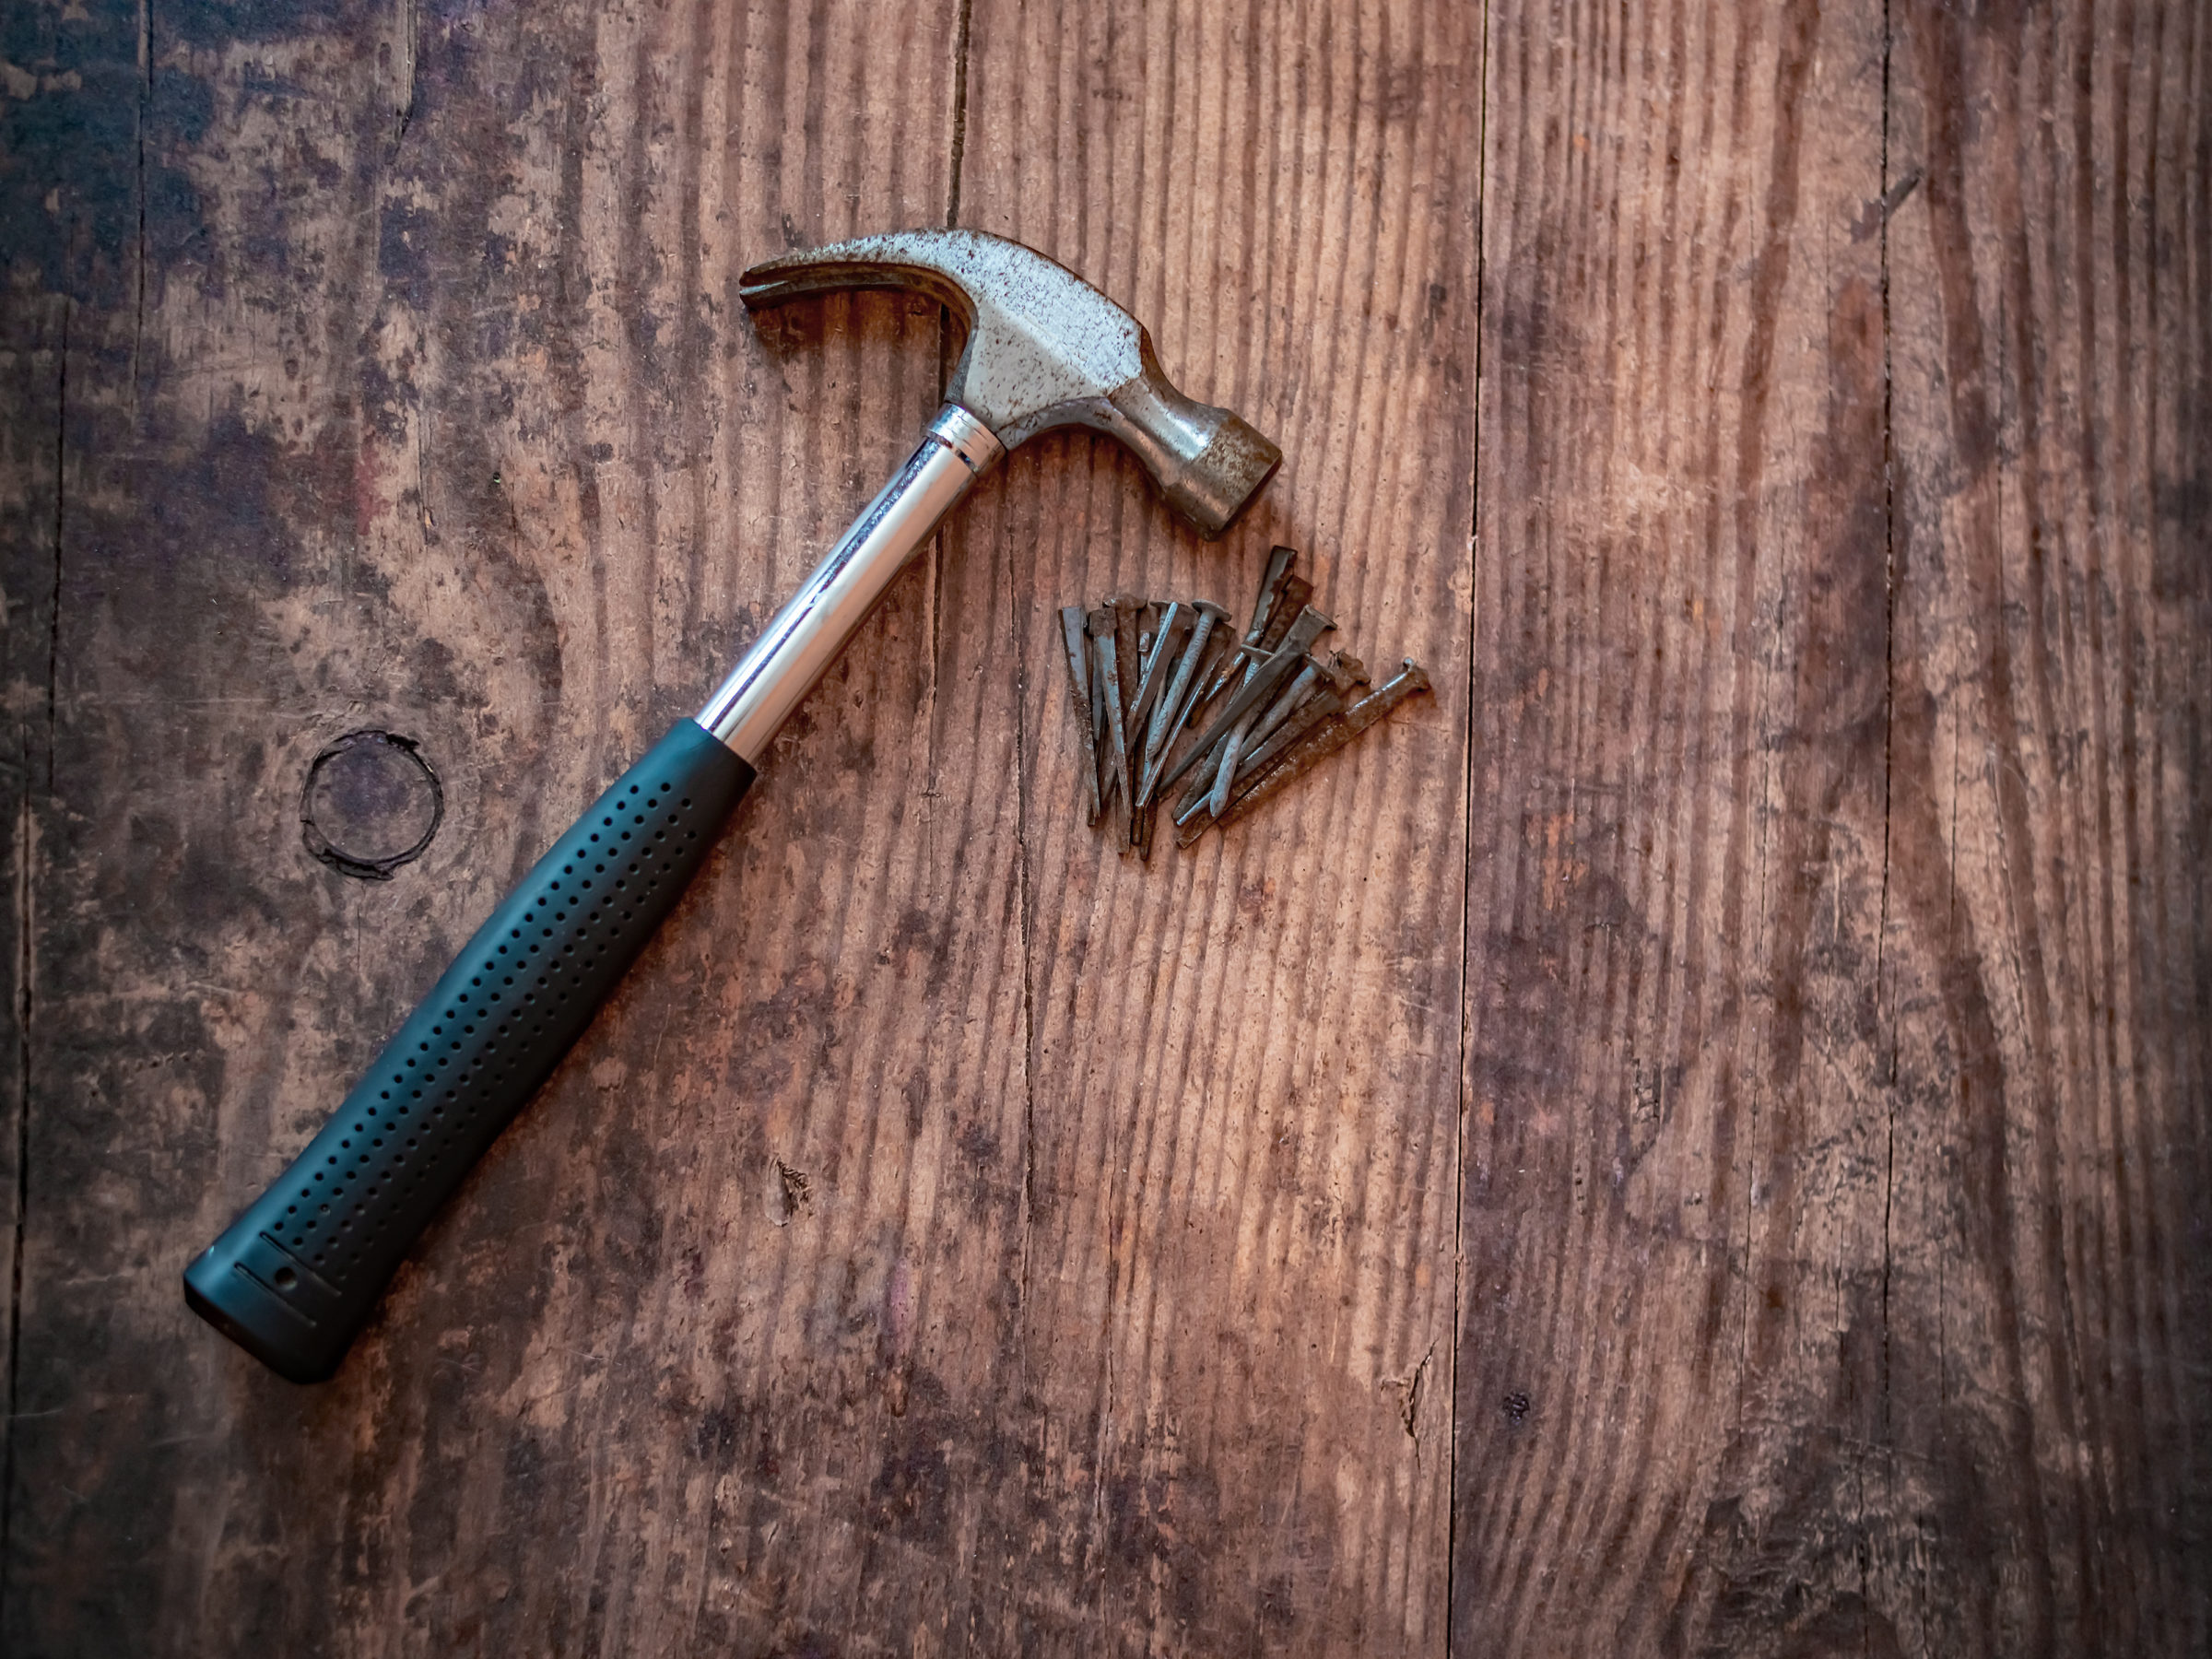 Top down view of claw hammer and rusty nails on a plain wooden background